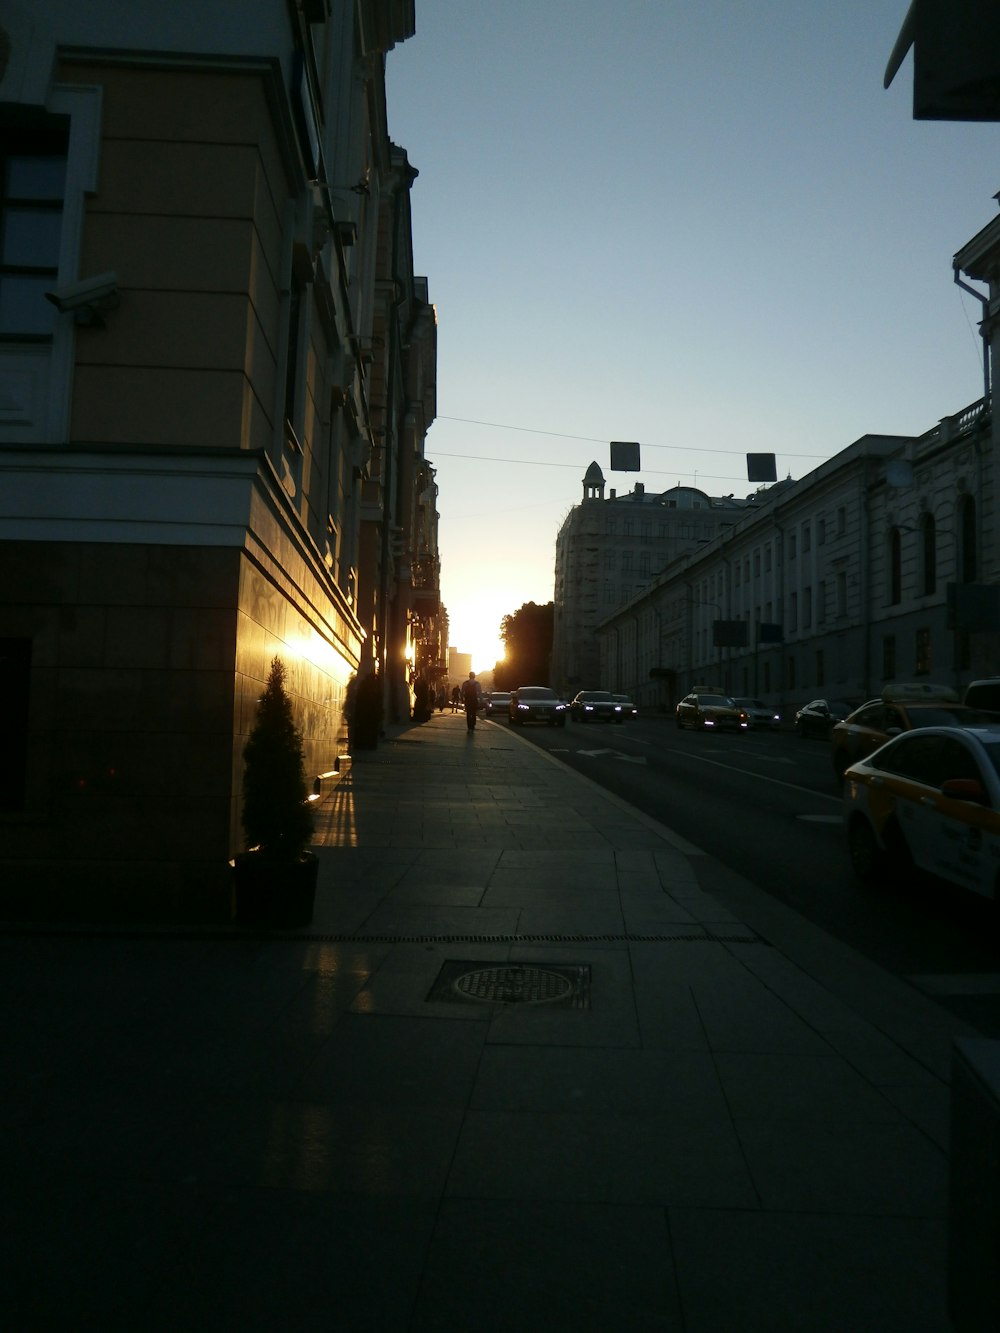 the sun is setting on a city street